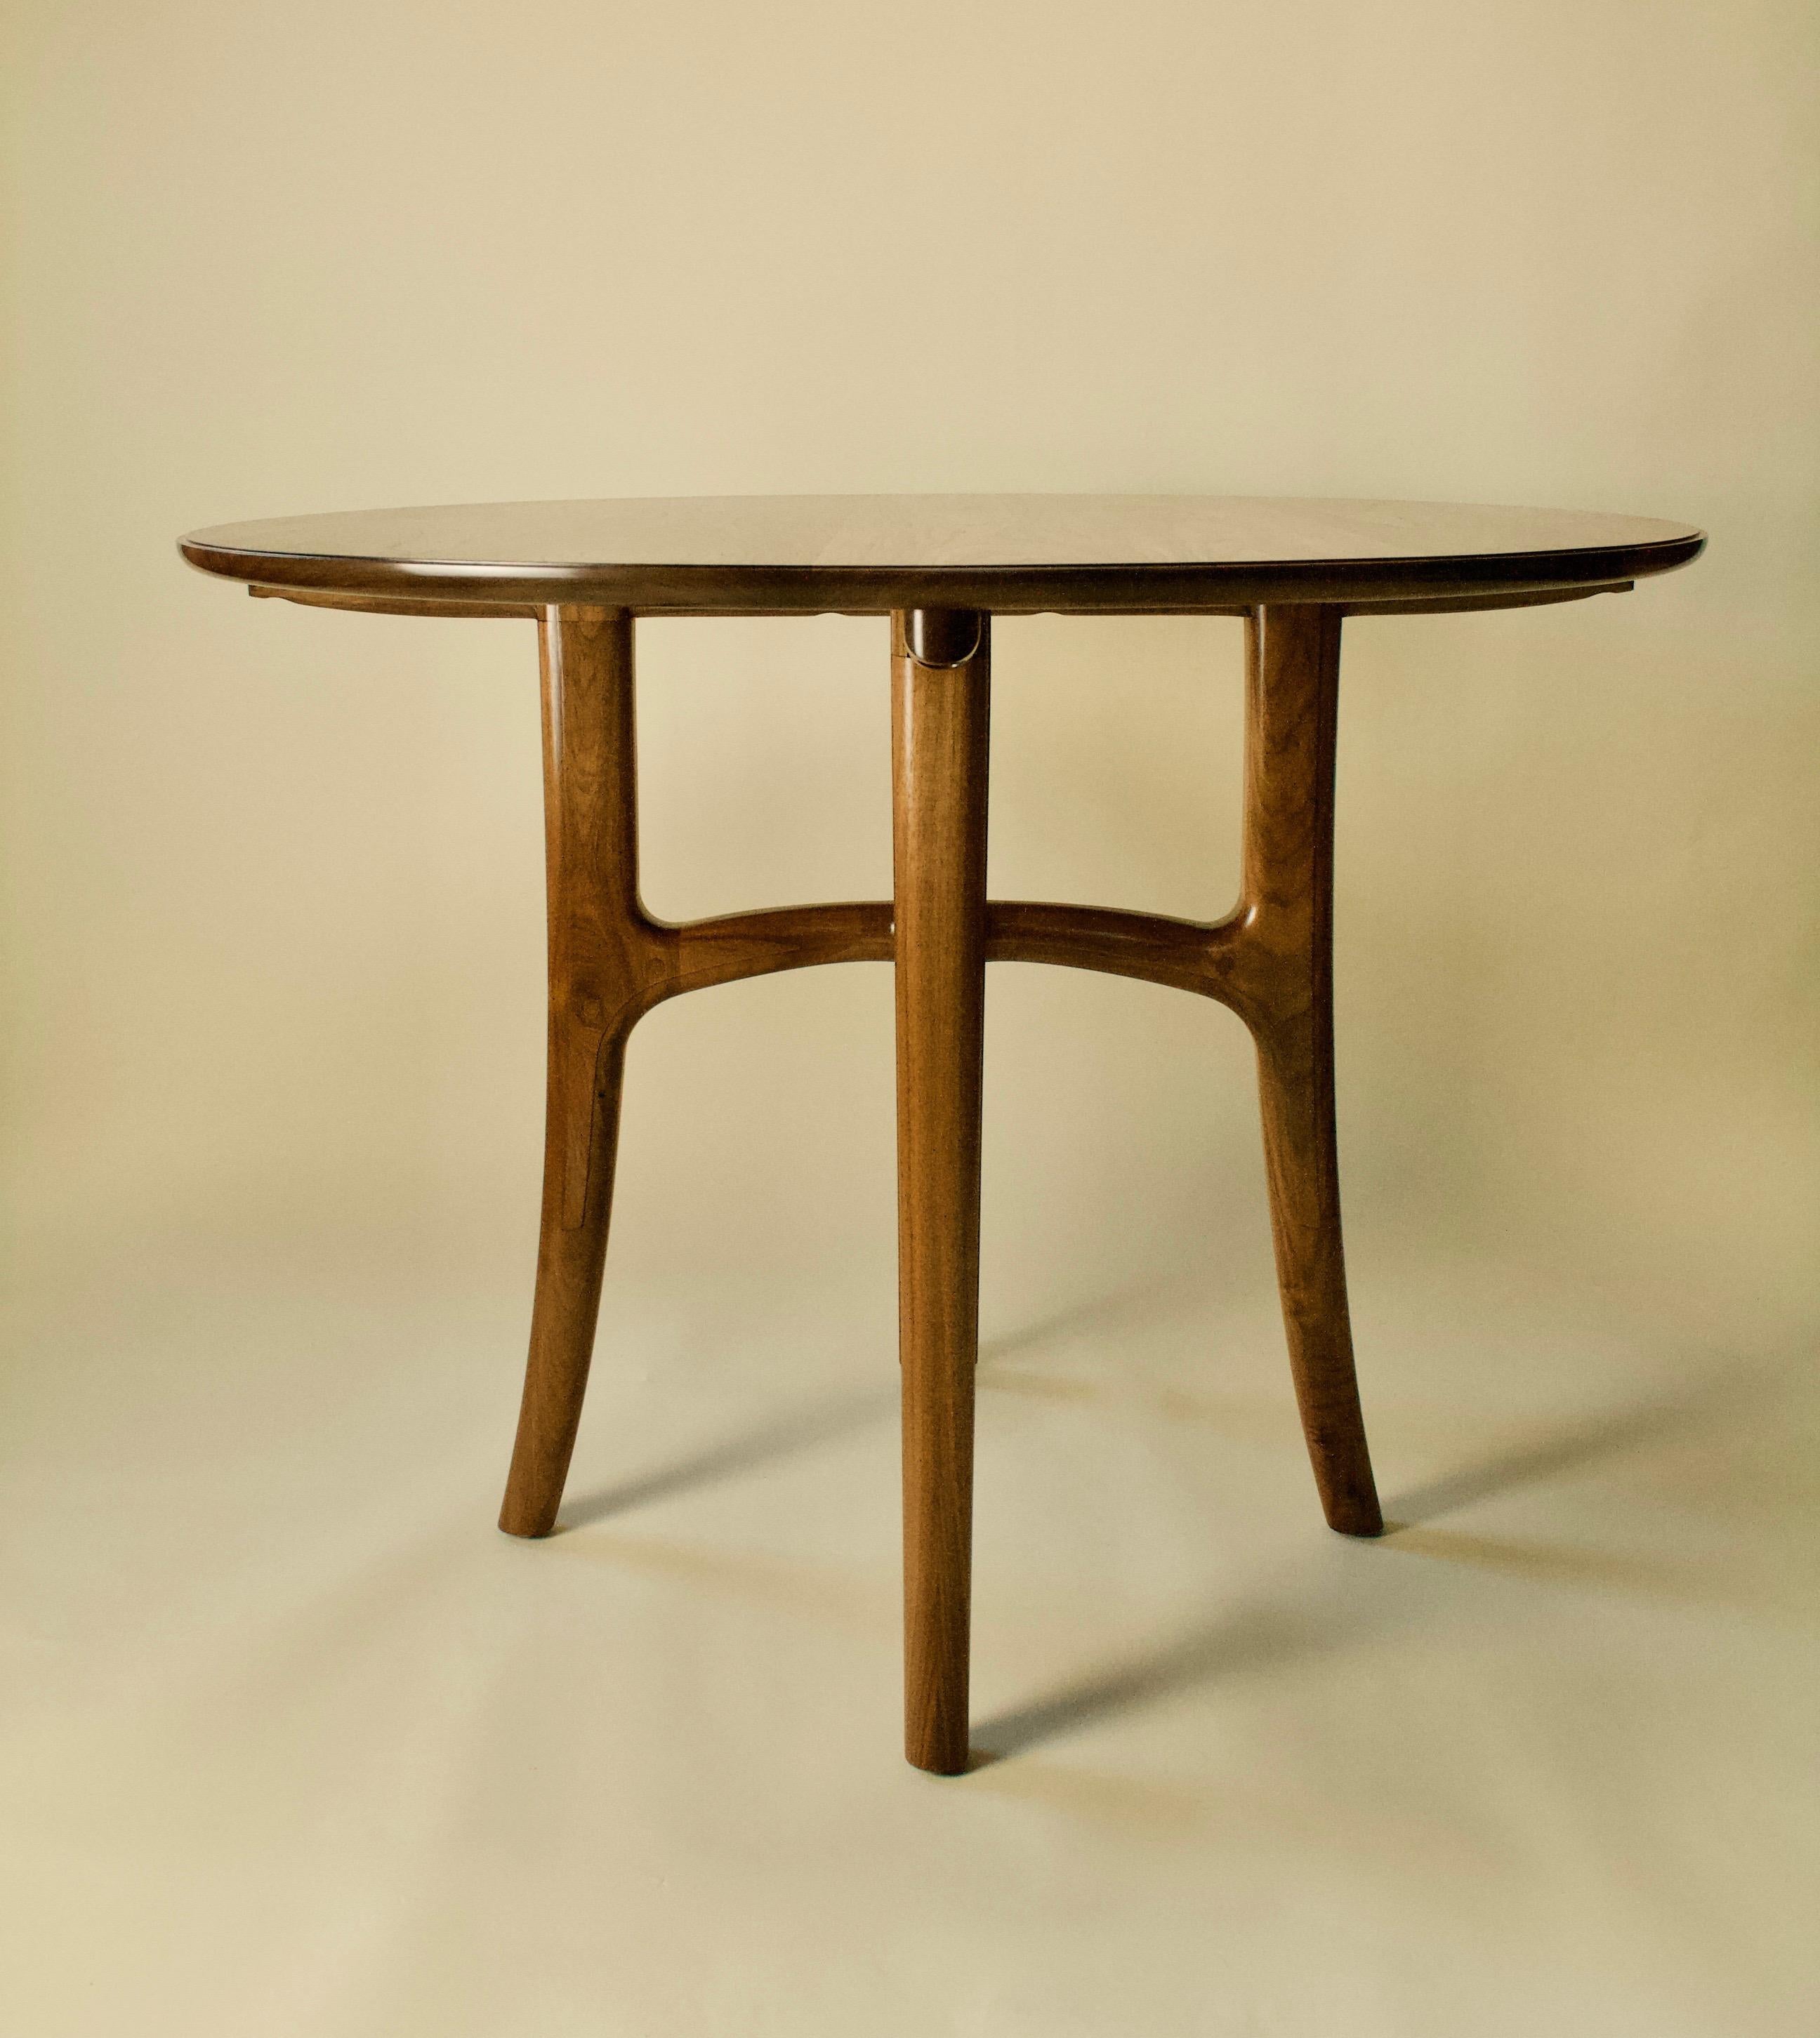 BIRD TABLE  Dining, Foyer, Entry

Designer Craftsman Furniture from Kenton Jeske woodworker is made to the highest levels of craft, material, and finish. Sculptural and sensual design alongside time honouring craftsmanship creates furniture that